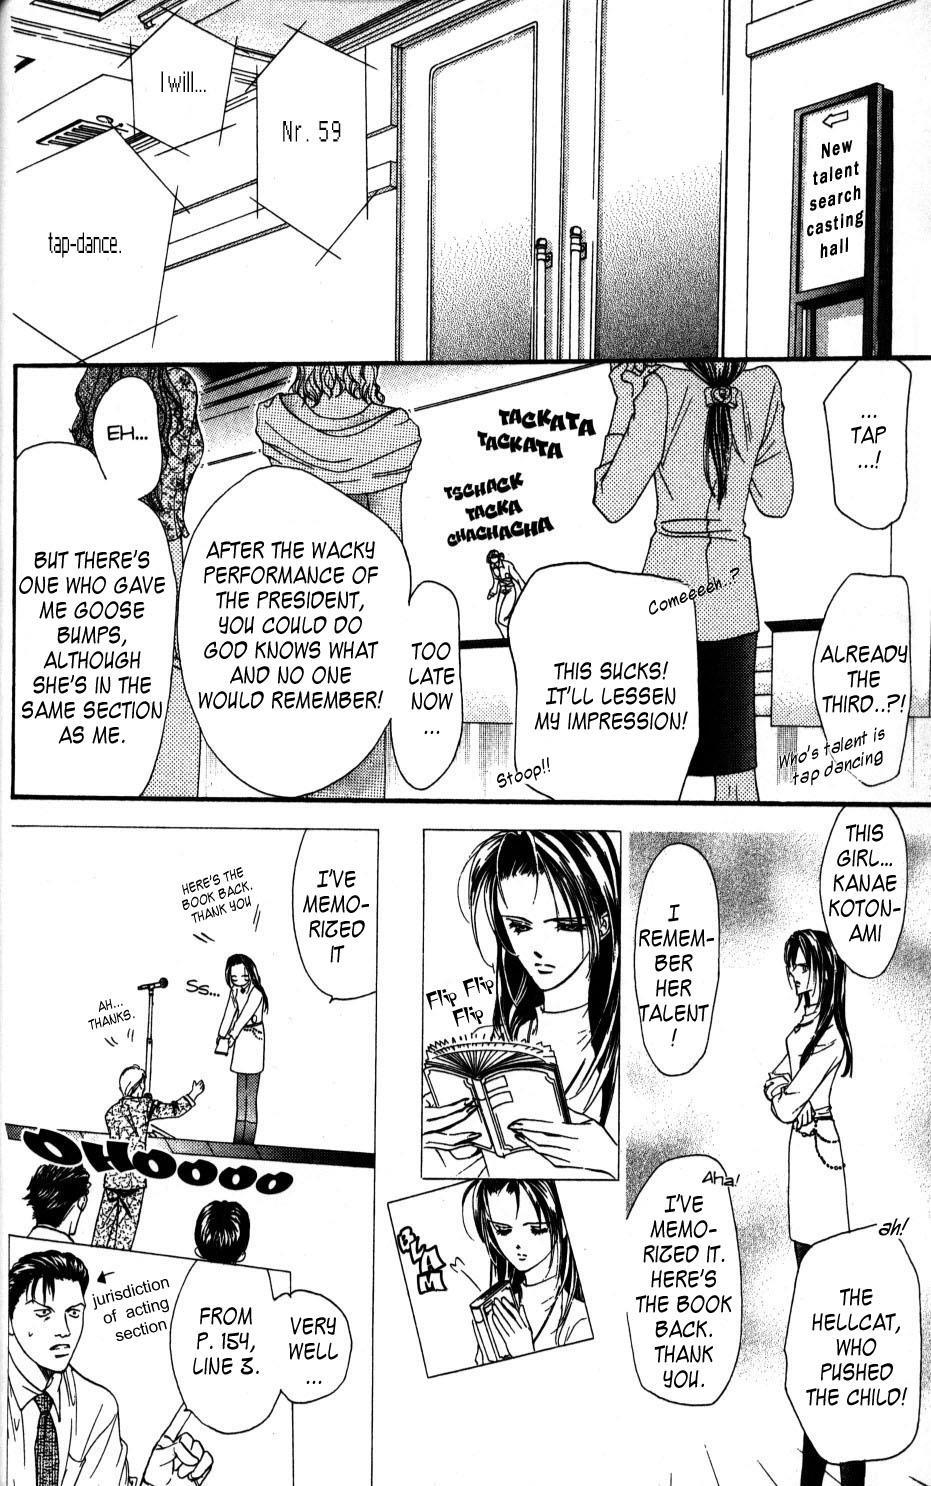 Skip Beat!, Chapter 4 The Feast of Horror, part 2 image 04